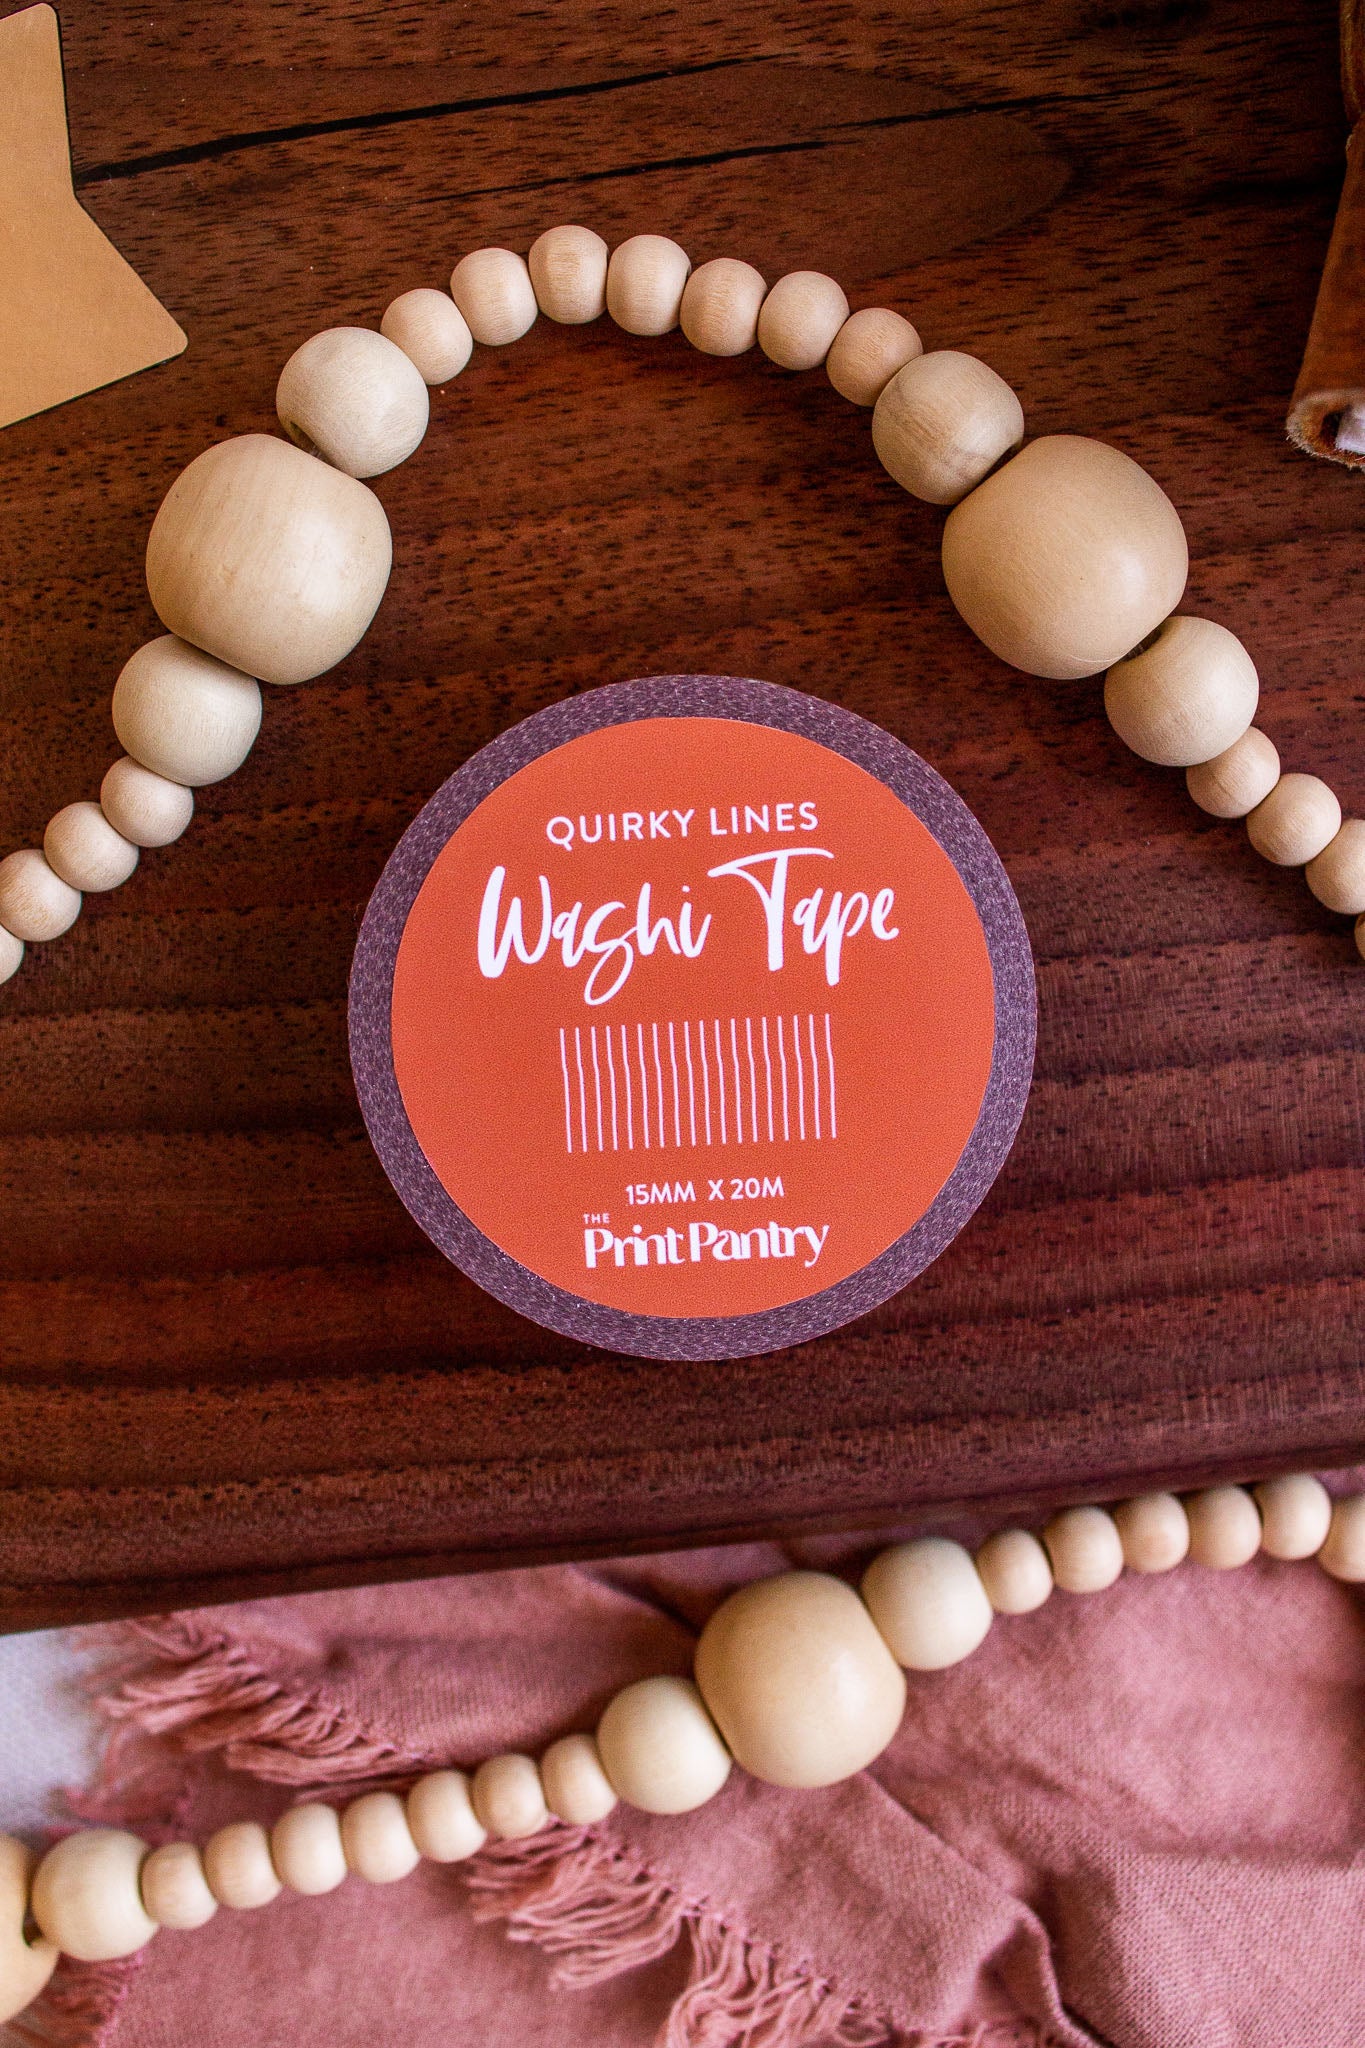 Quirky Lines Washi Tape laying on a decorative wooden tray